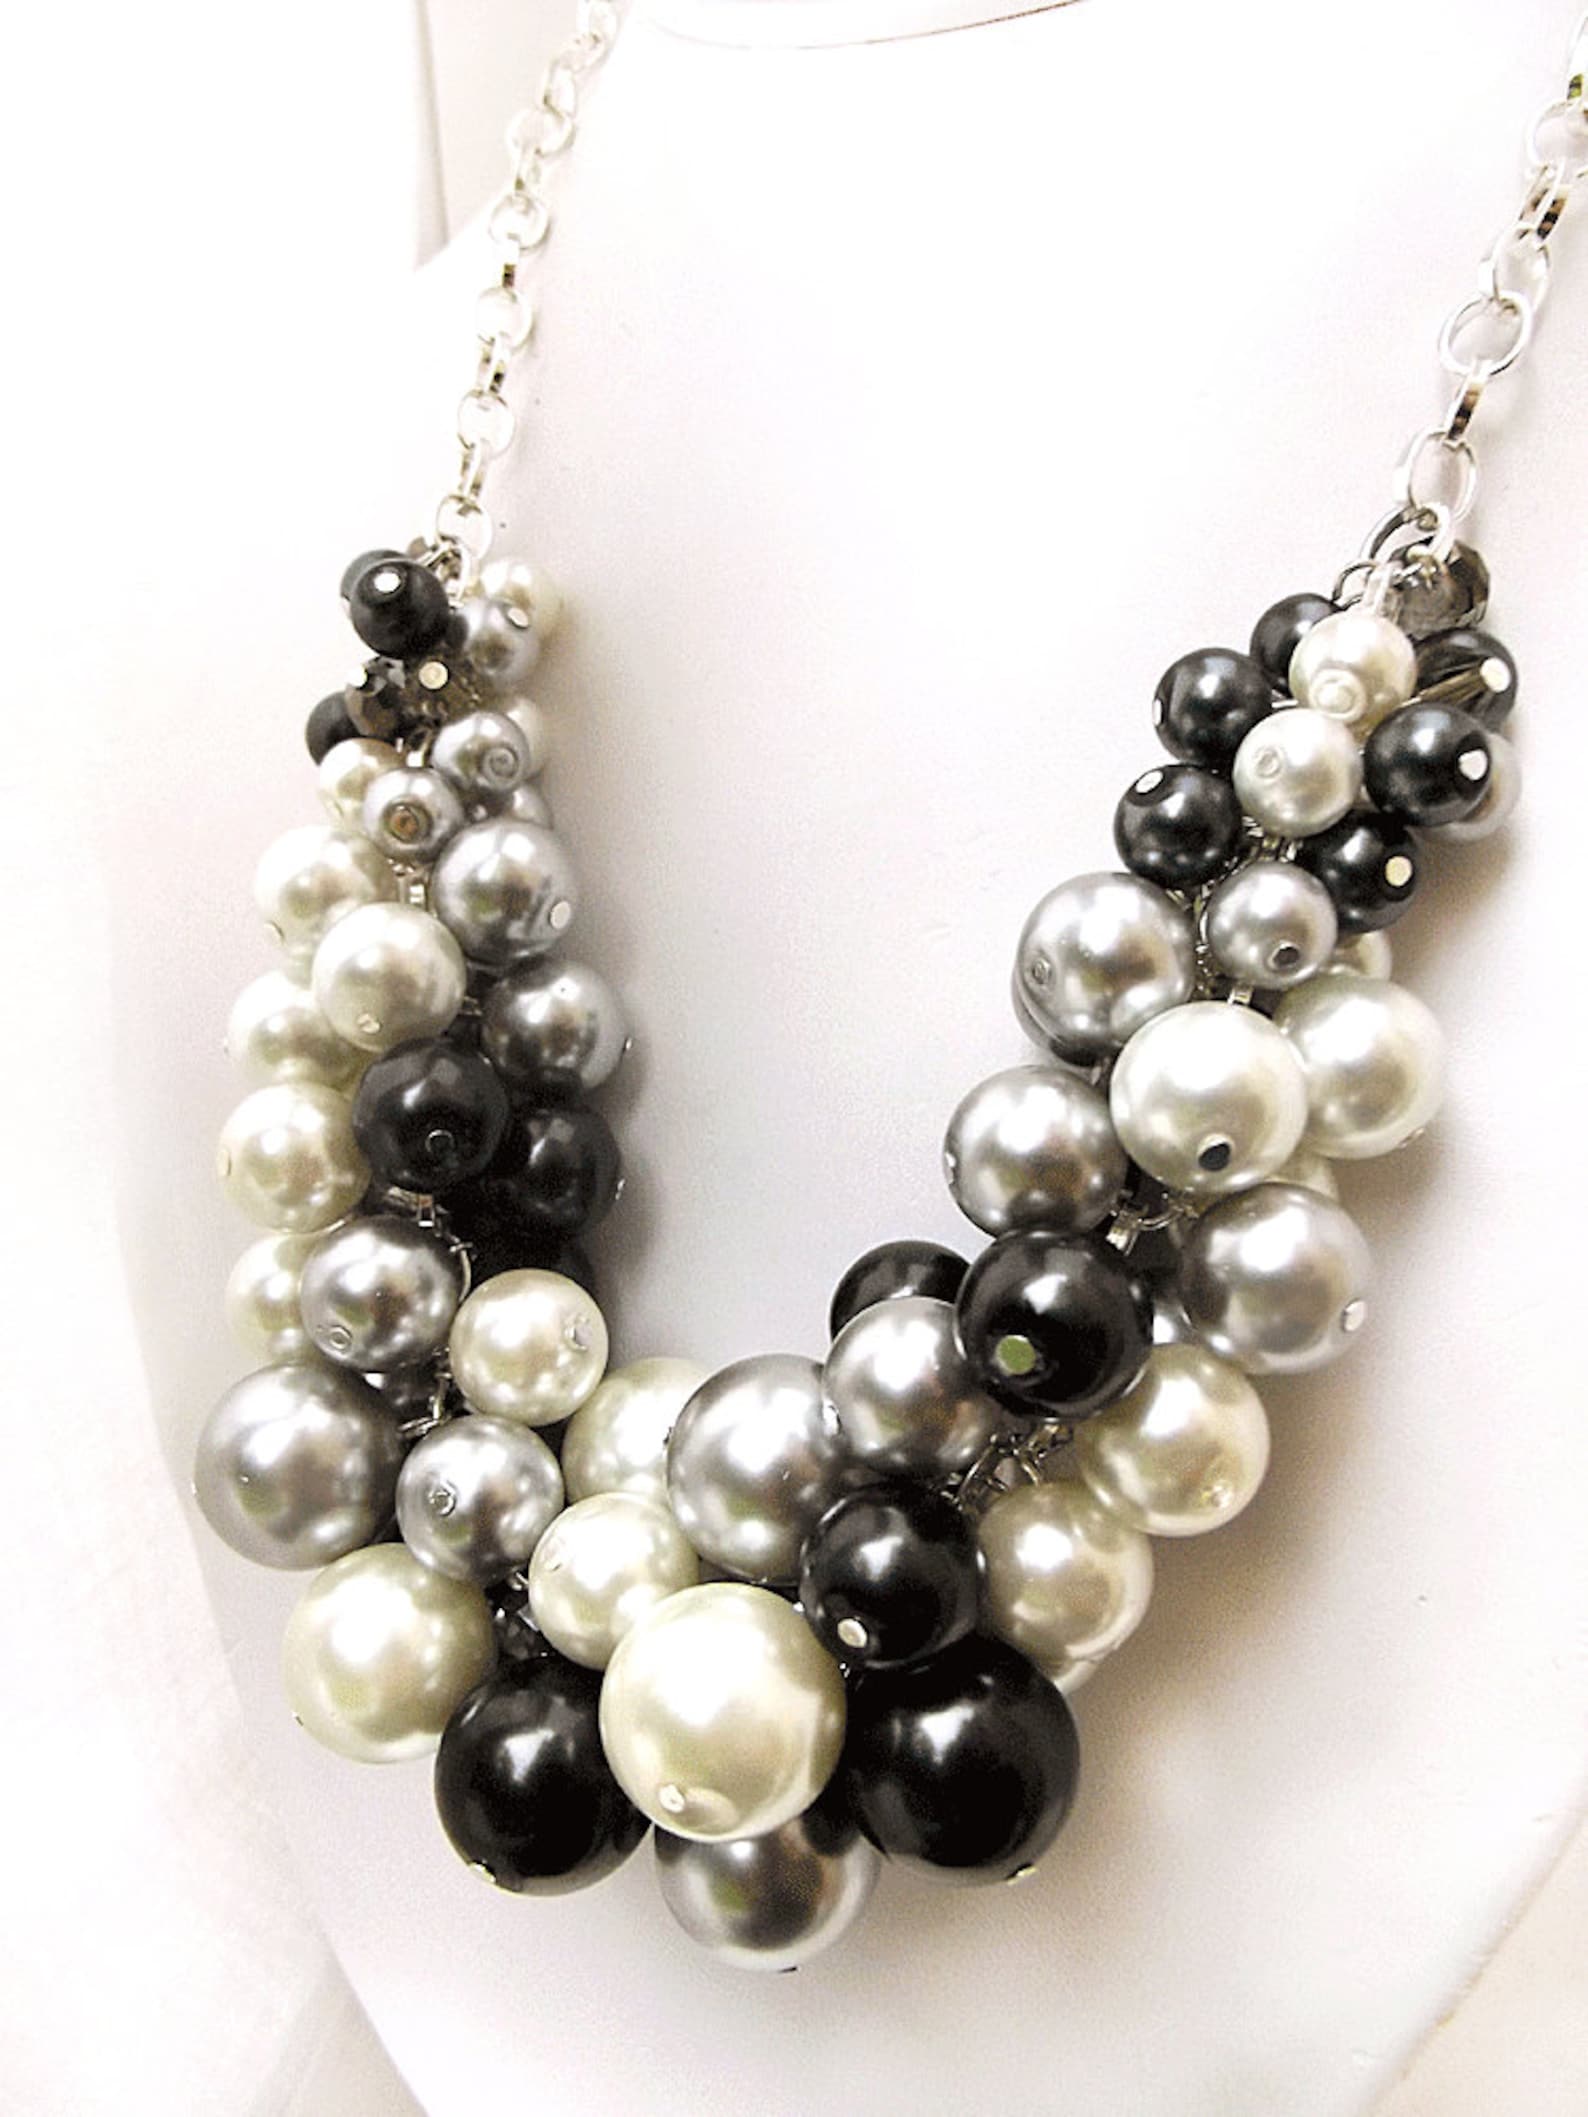 Chunky Beaded Necklace Pearl Statement Necklace Black White - Etsy